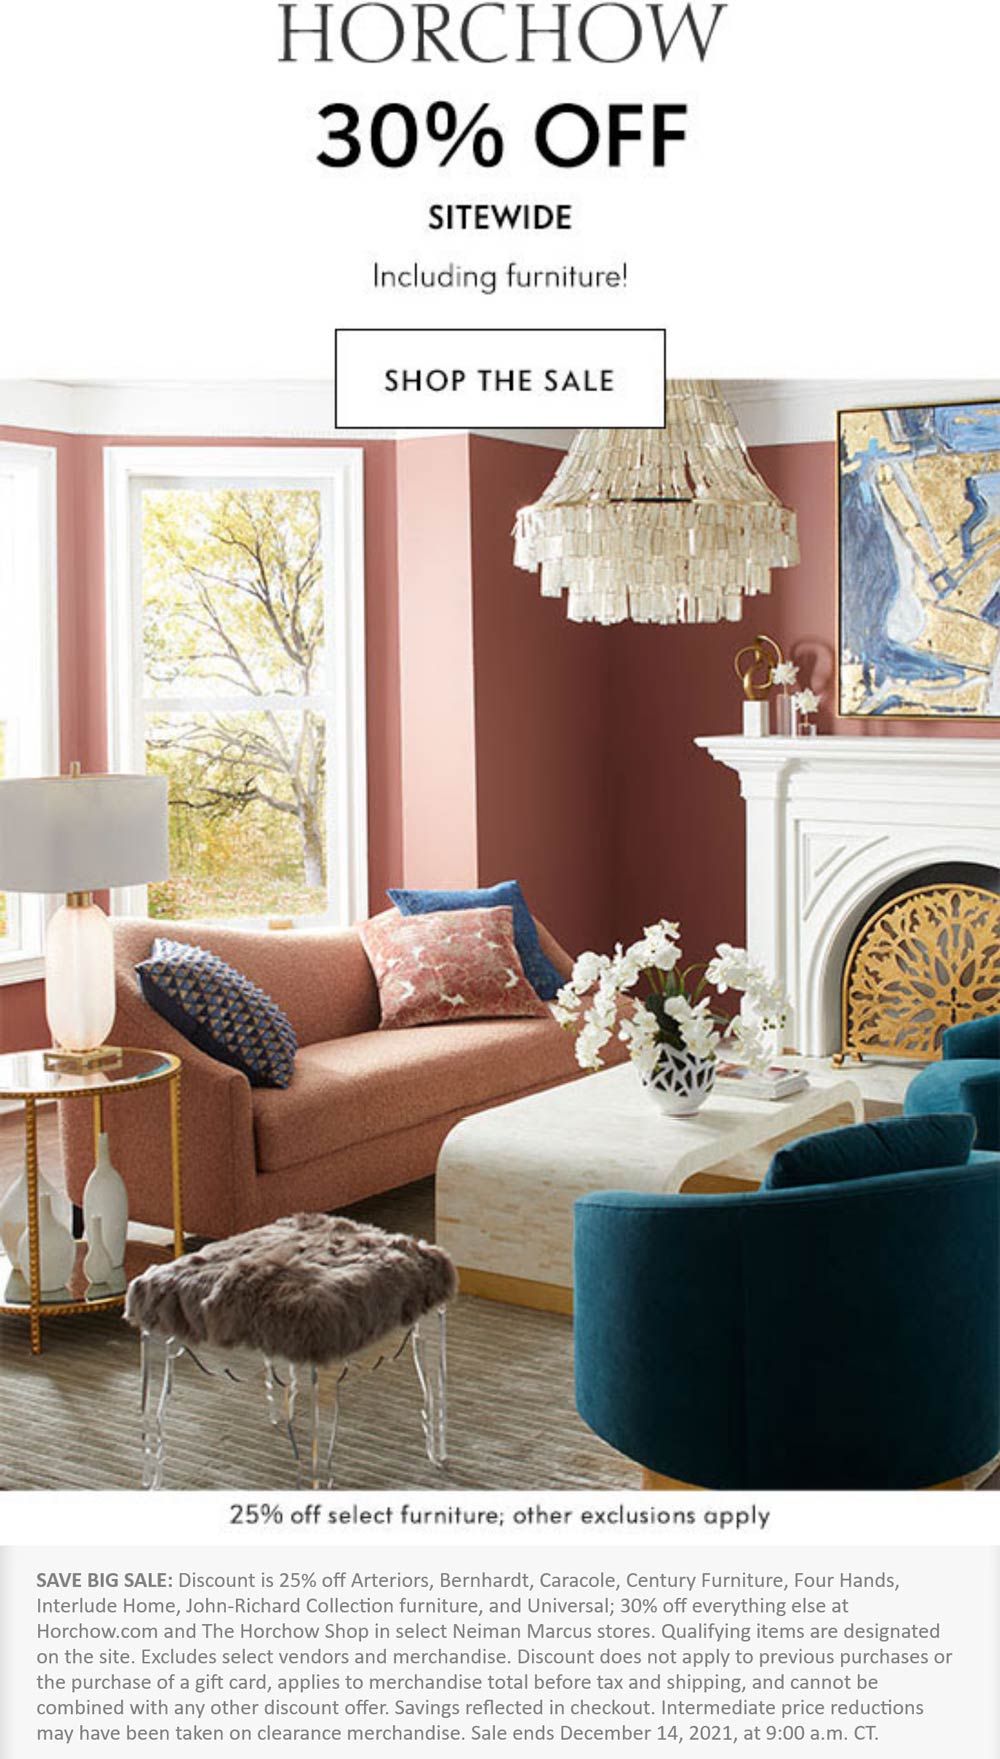 Horchow stores Coupon  30% off everything including furniture at Horchow, ditto online #horchow 